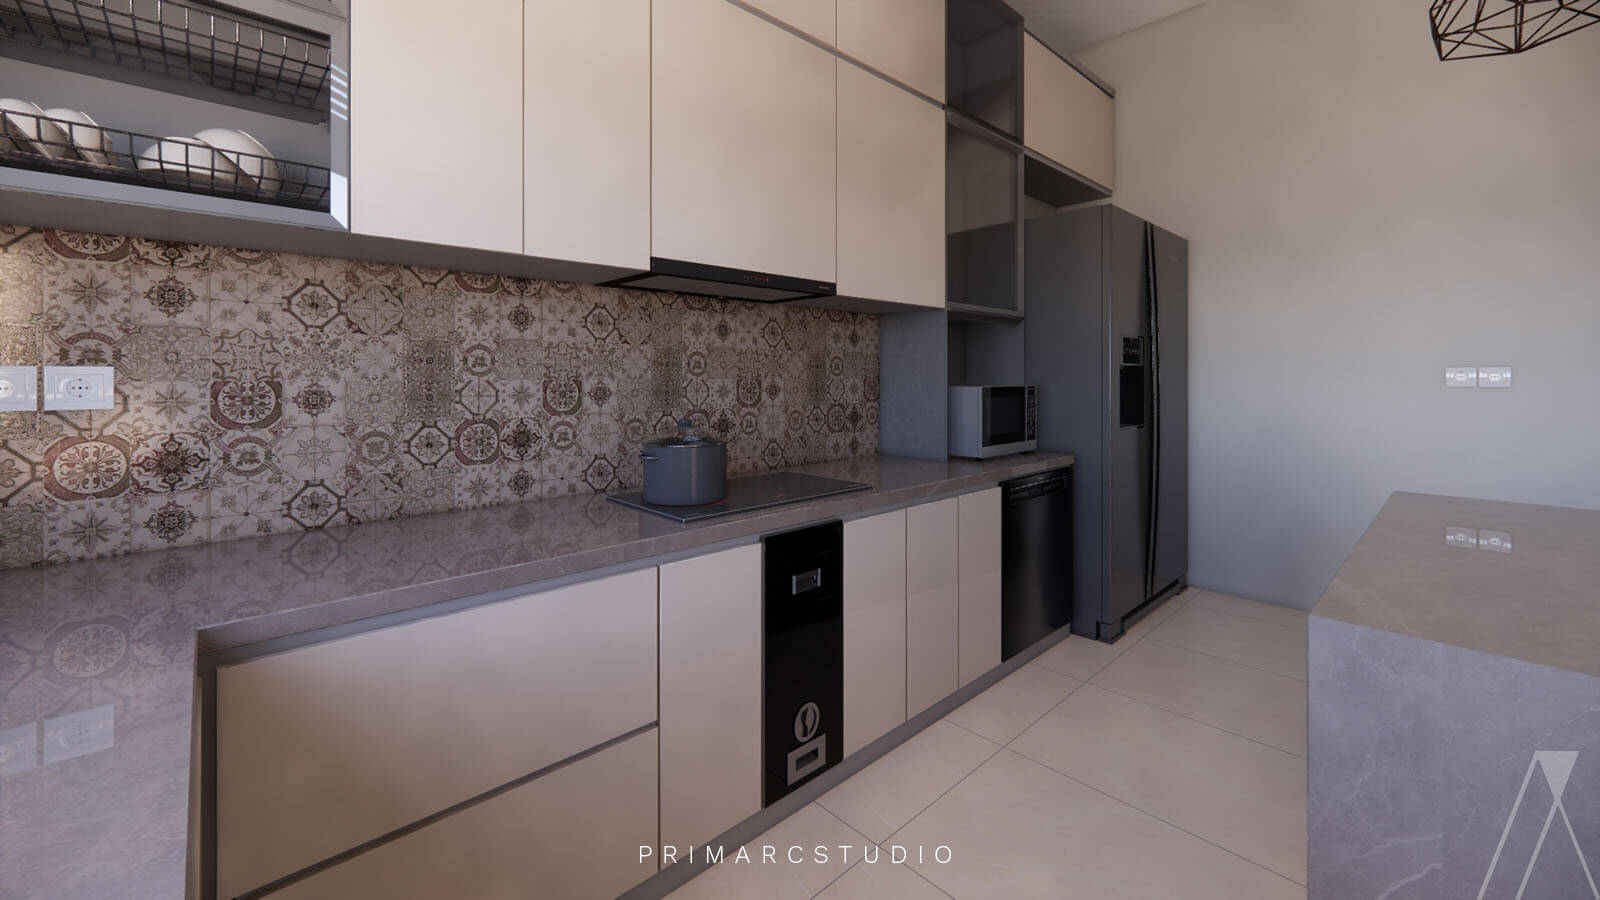 Pattern tile on the wall and kitchen interior design by Primarc Studio